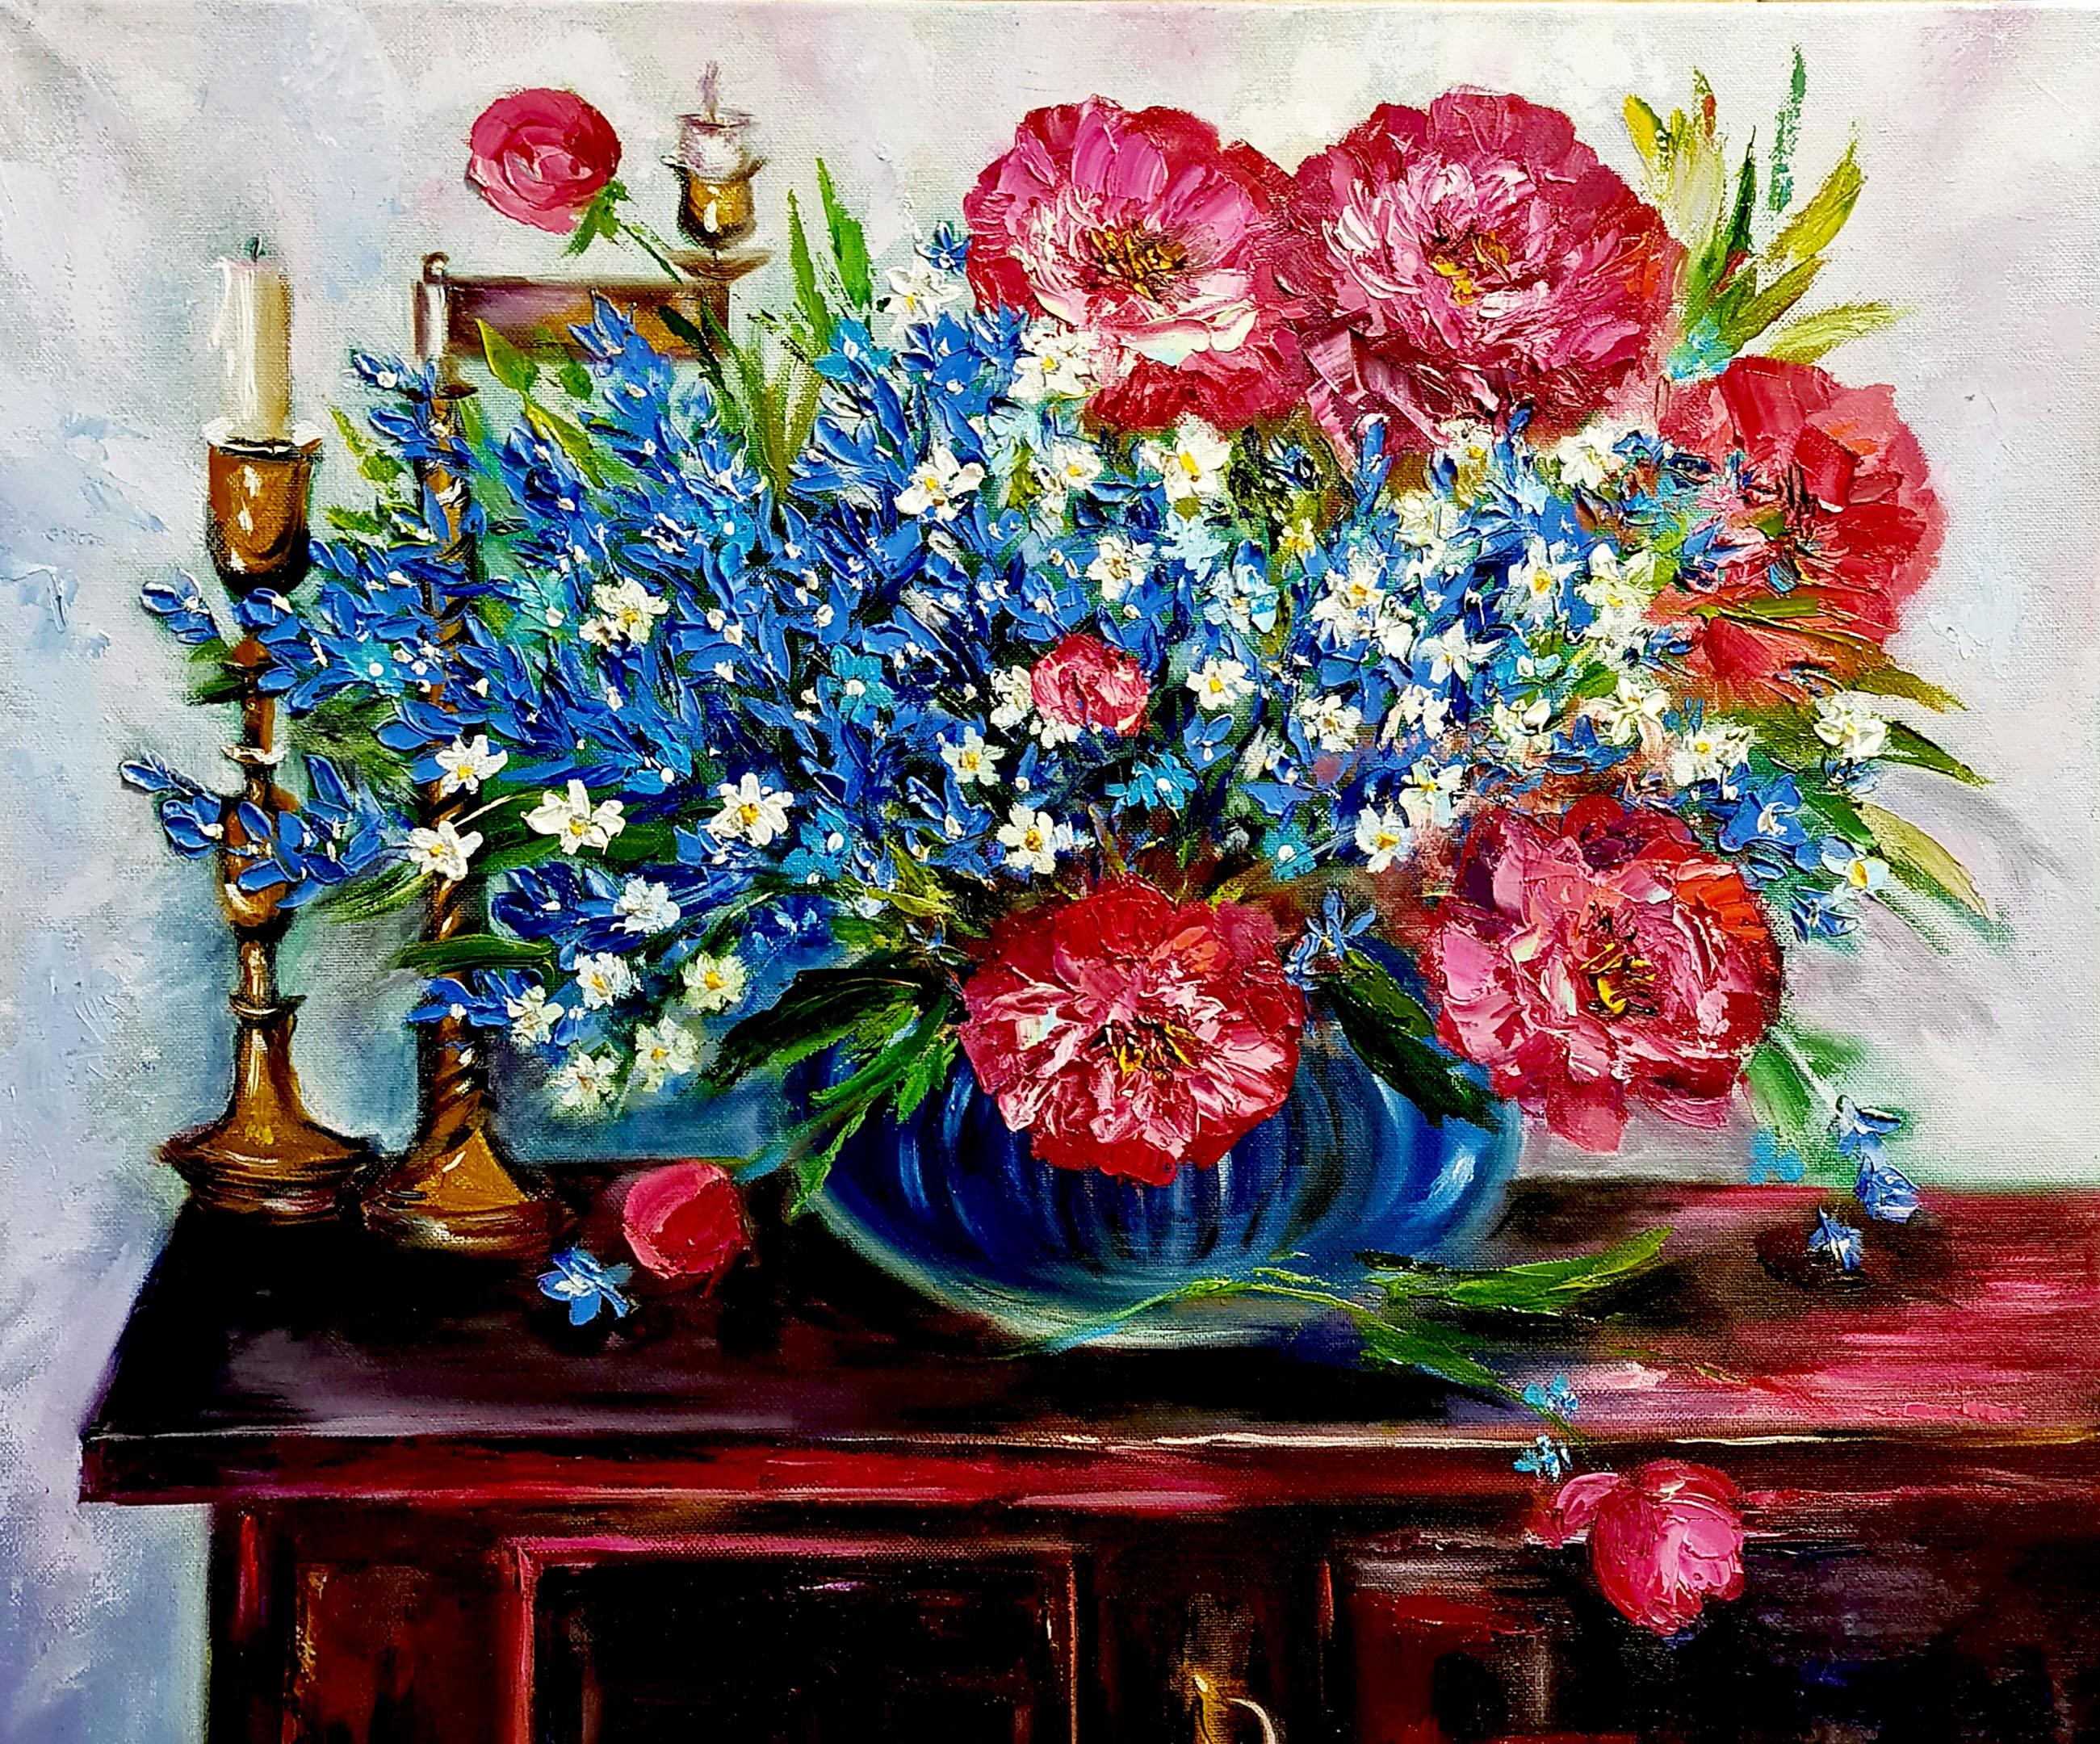 Burgundy peonies, blue flowers in a vase.Candles and antique table.